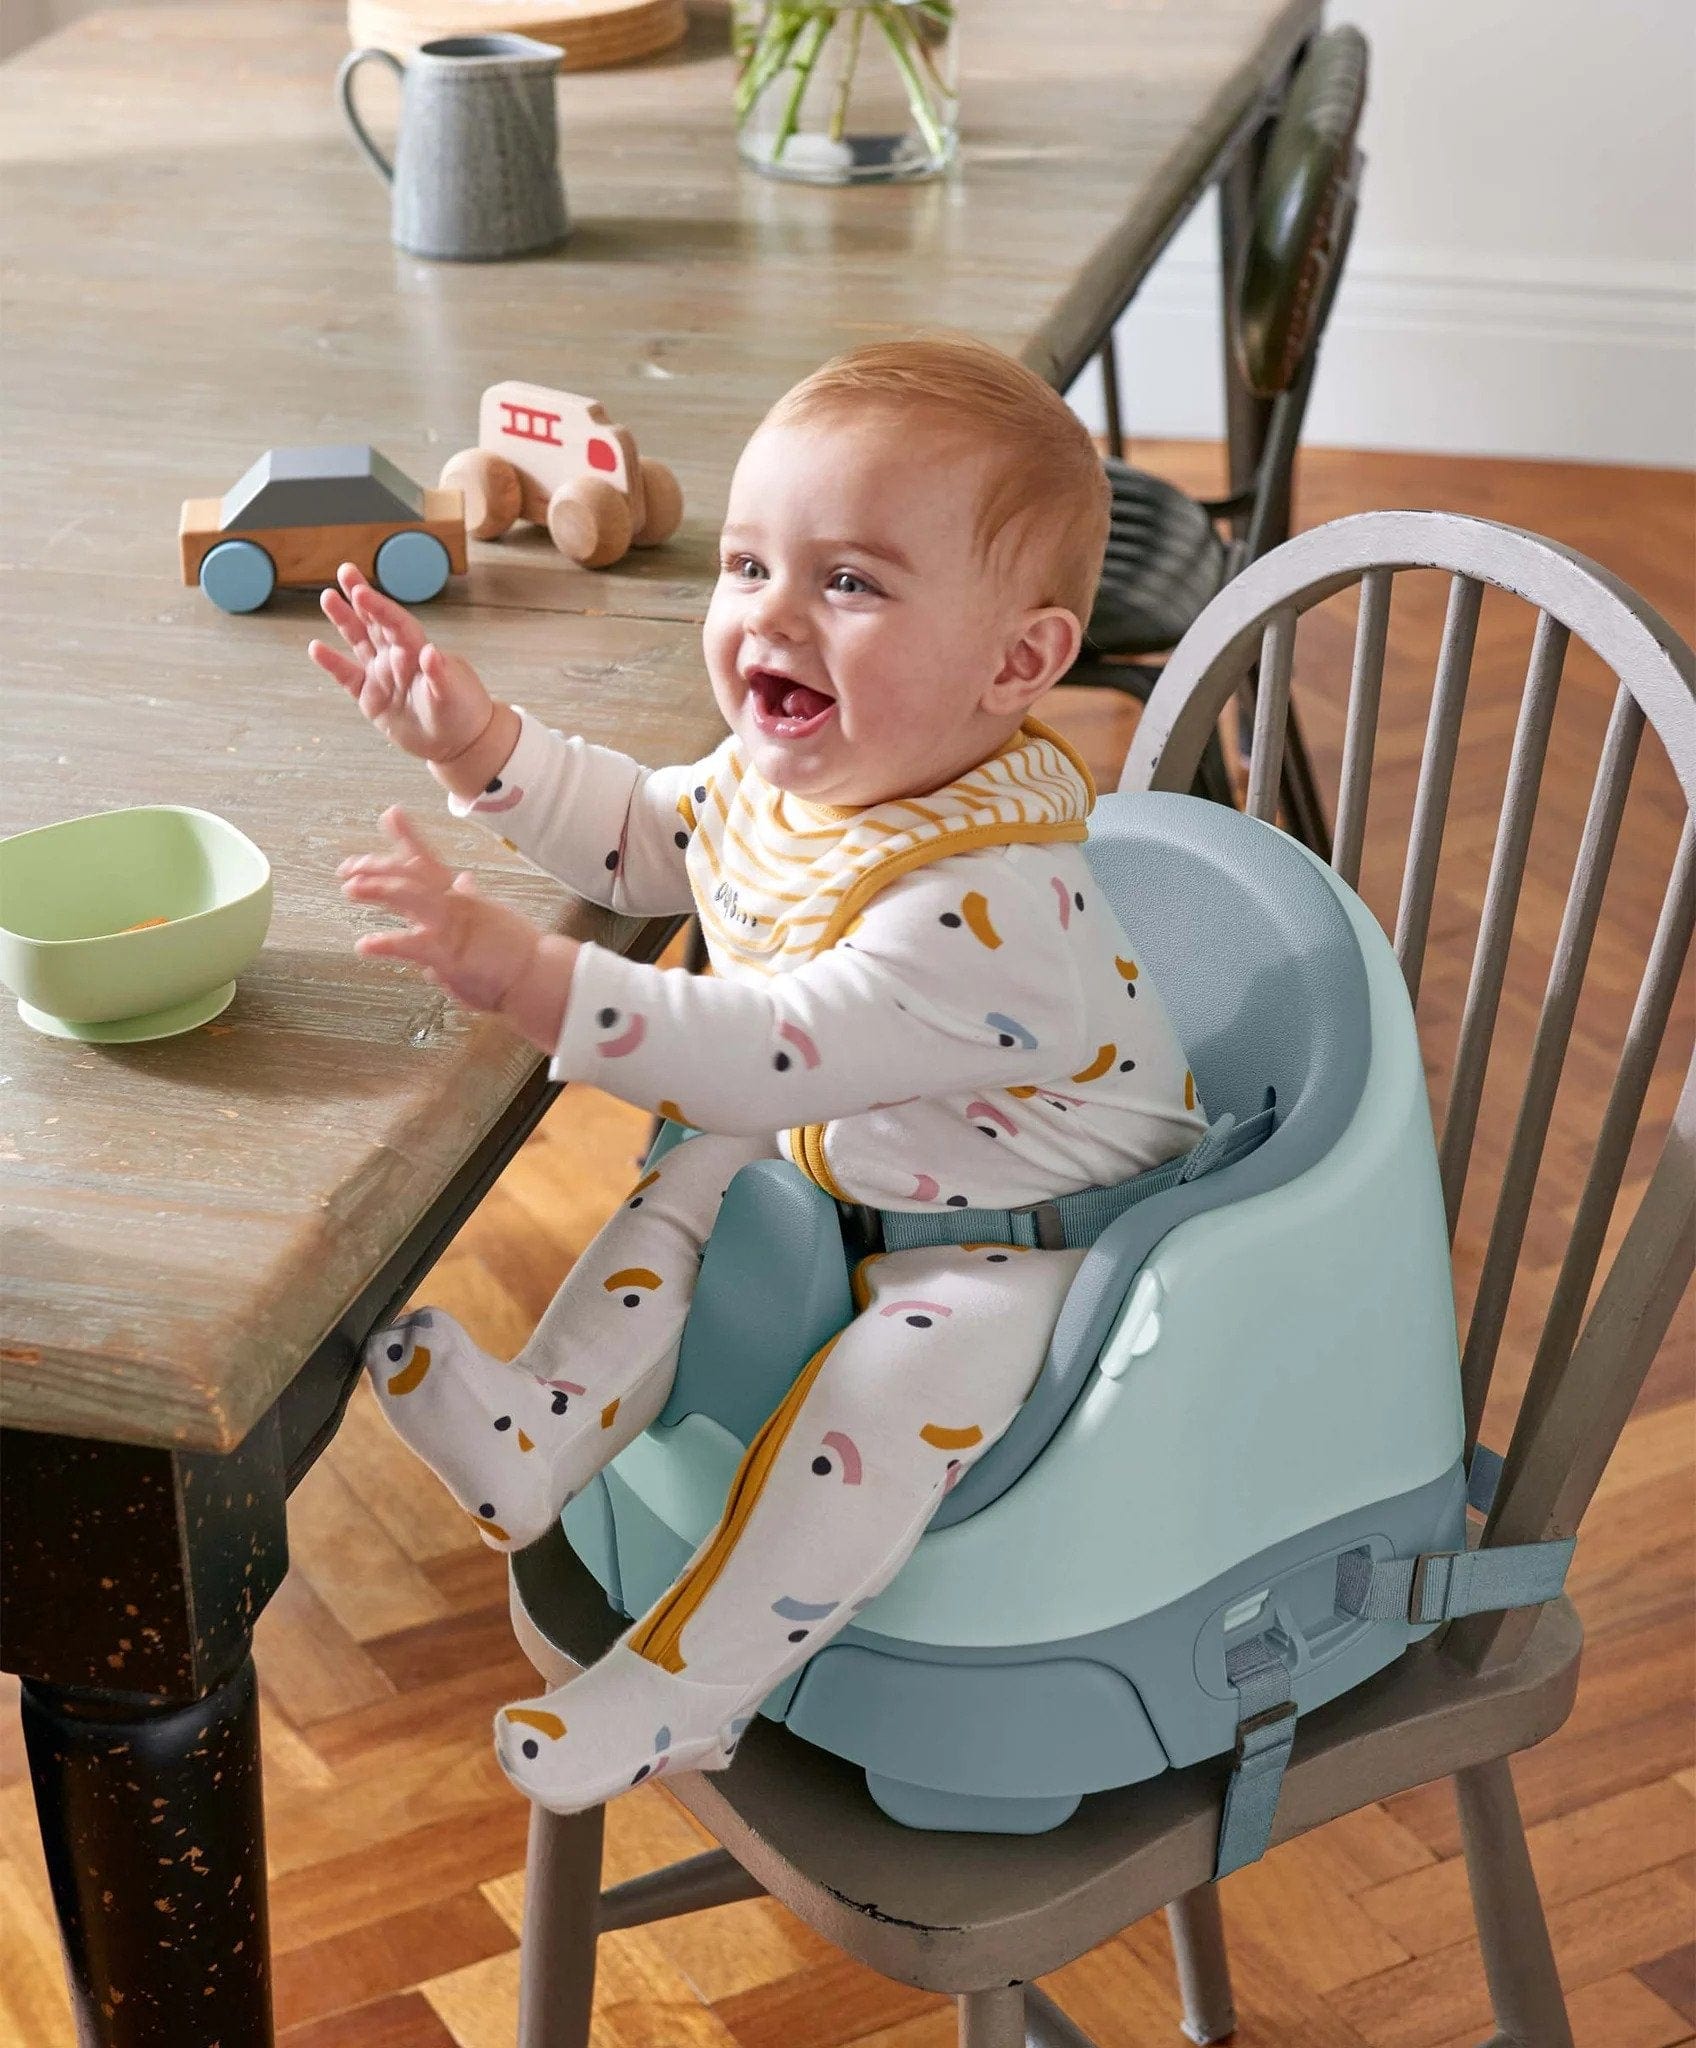 Mamas & Papas Bug 3-in-1 Floor & Booster Seat with Activity Tray in Bluebell Activity Toys 9868L7100 5057232699255